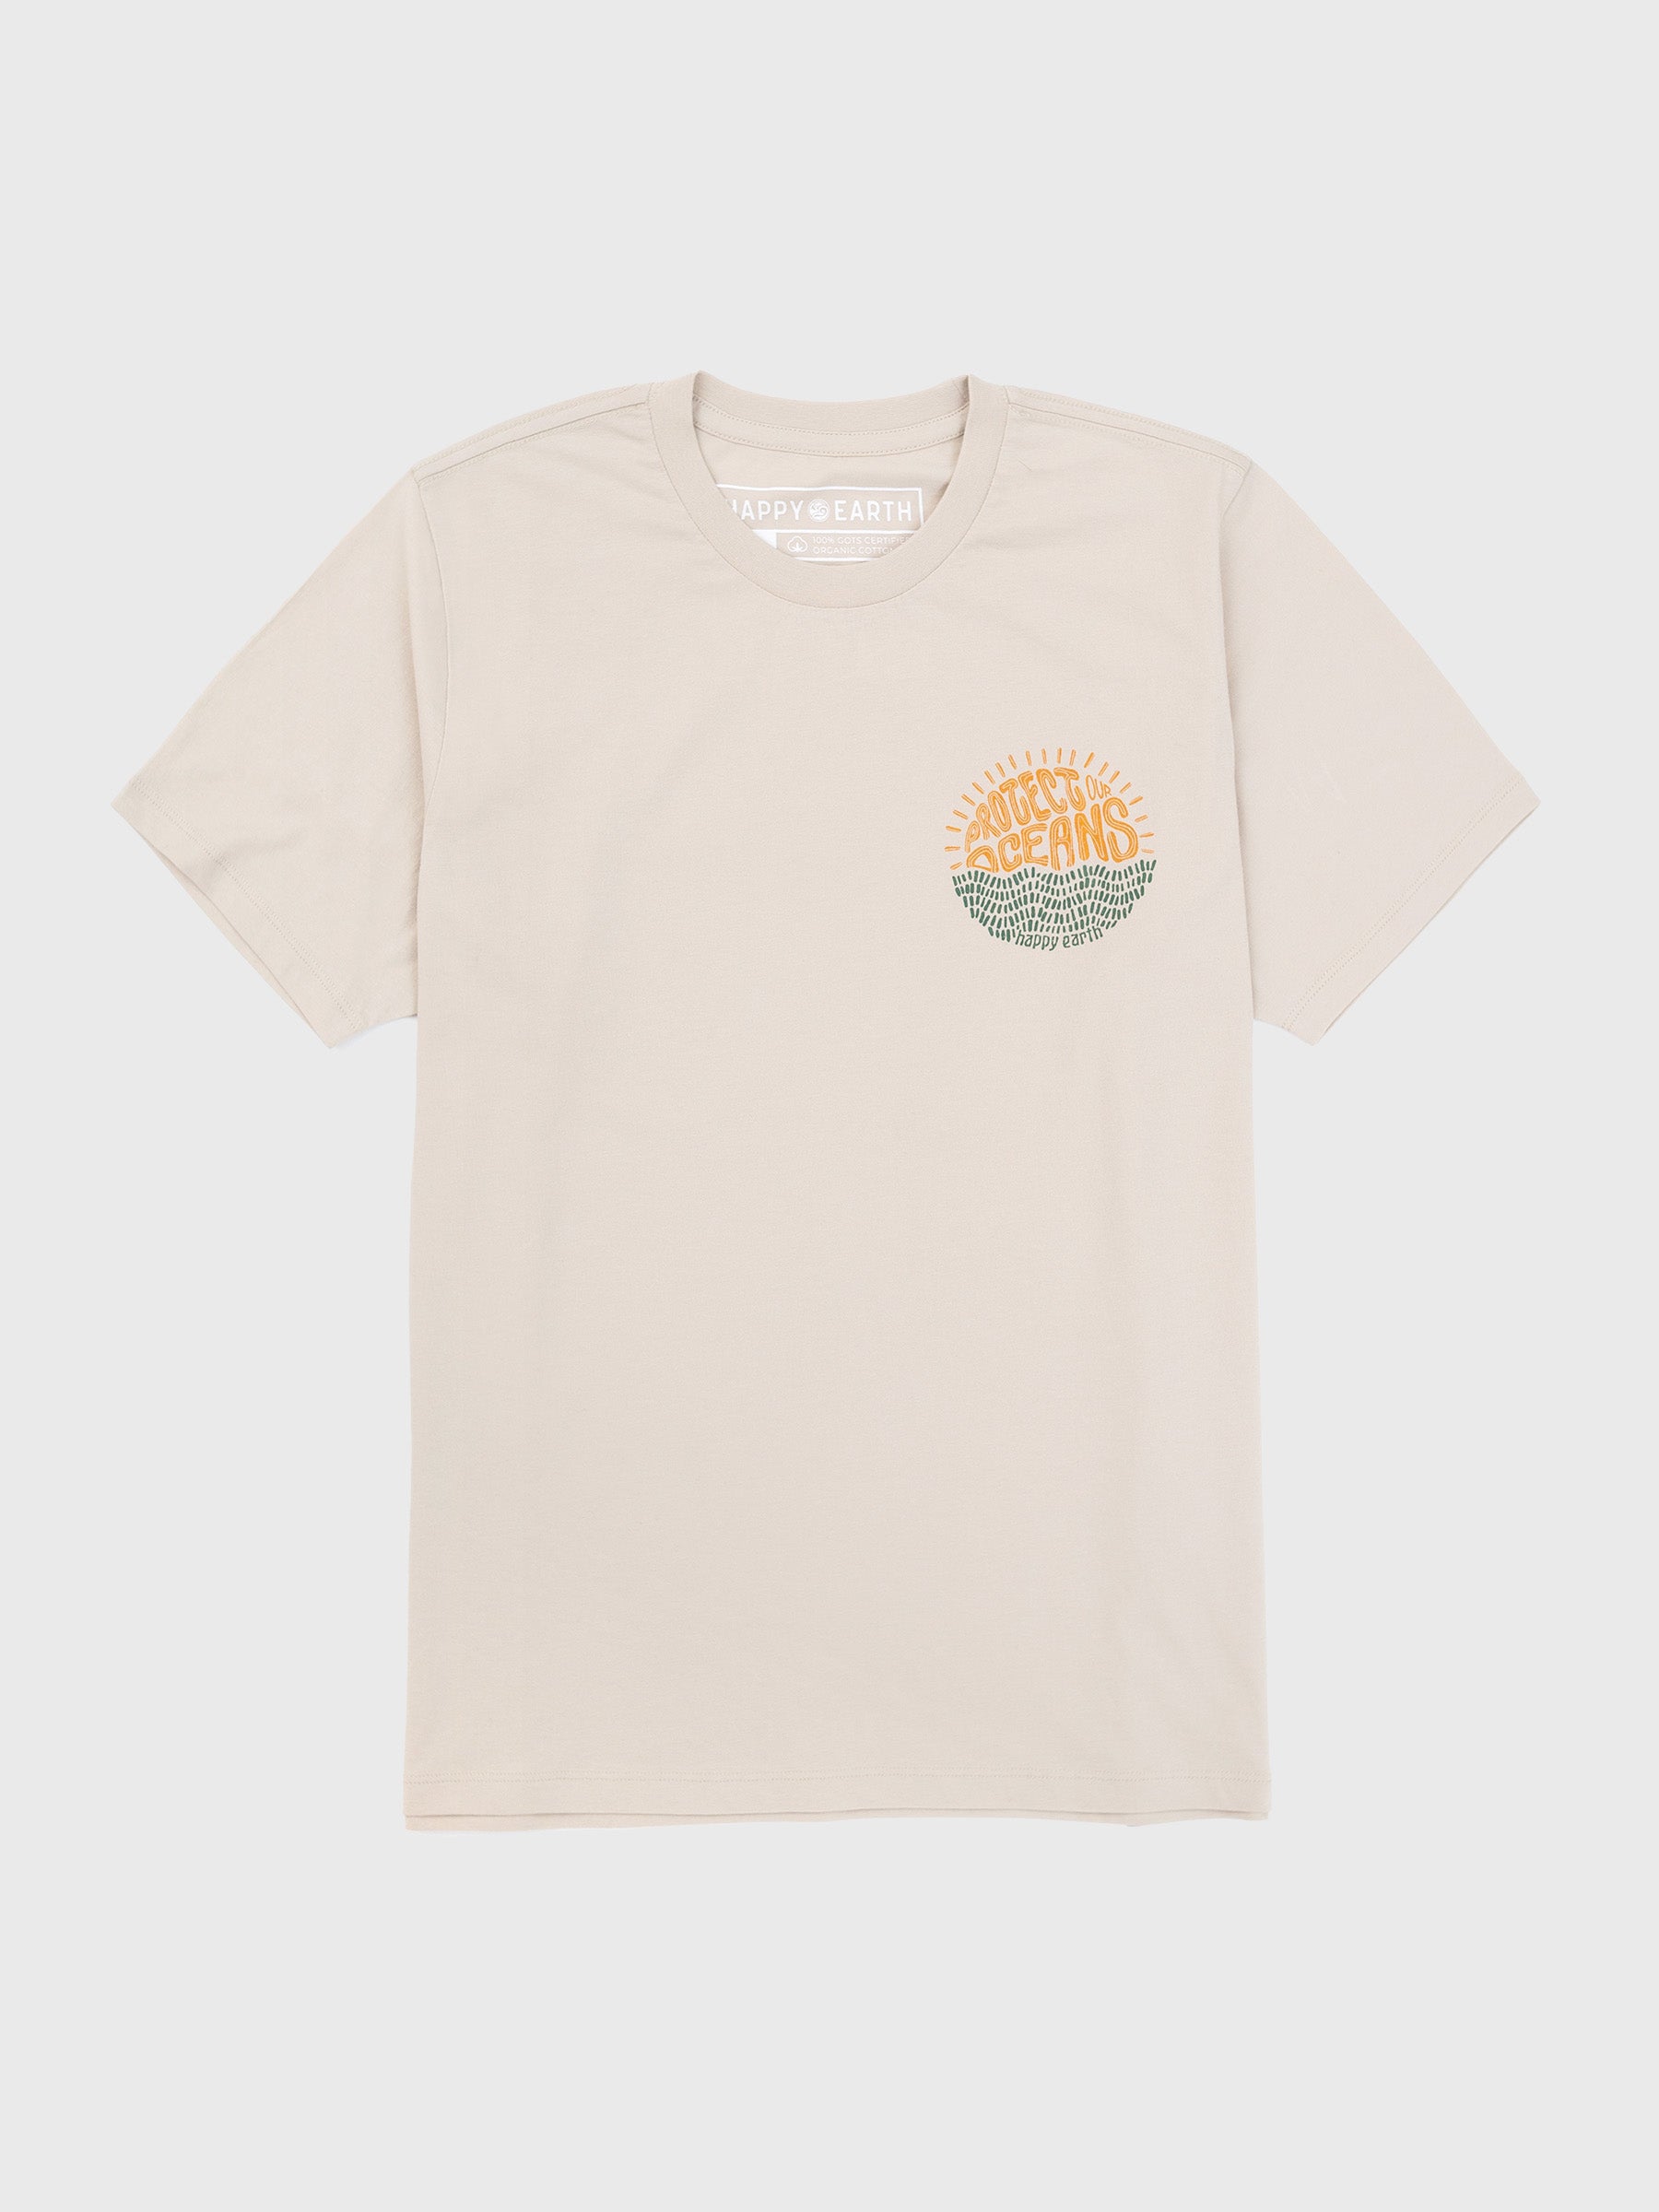 Protect Our Oceans Tee